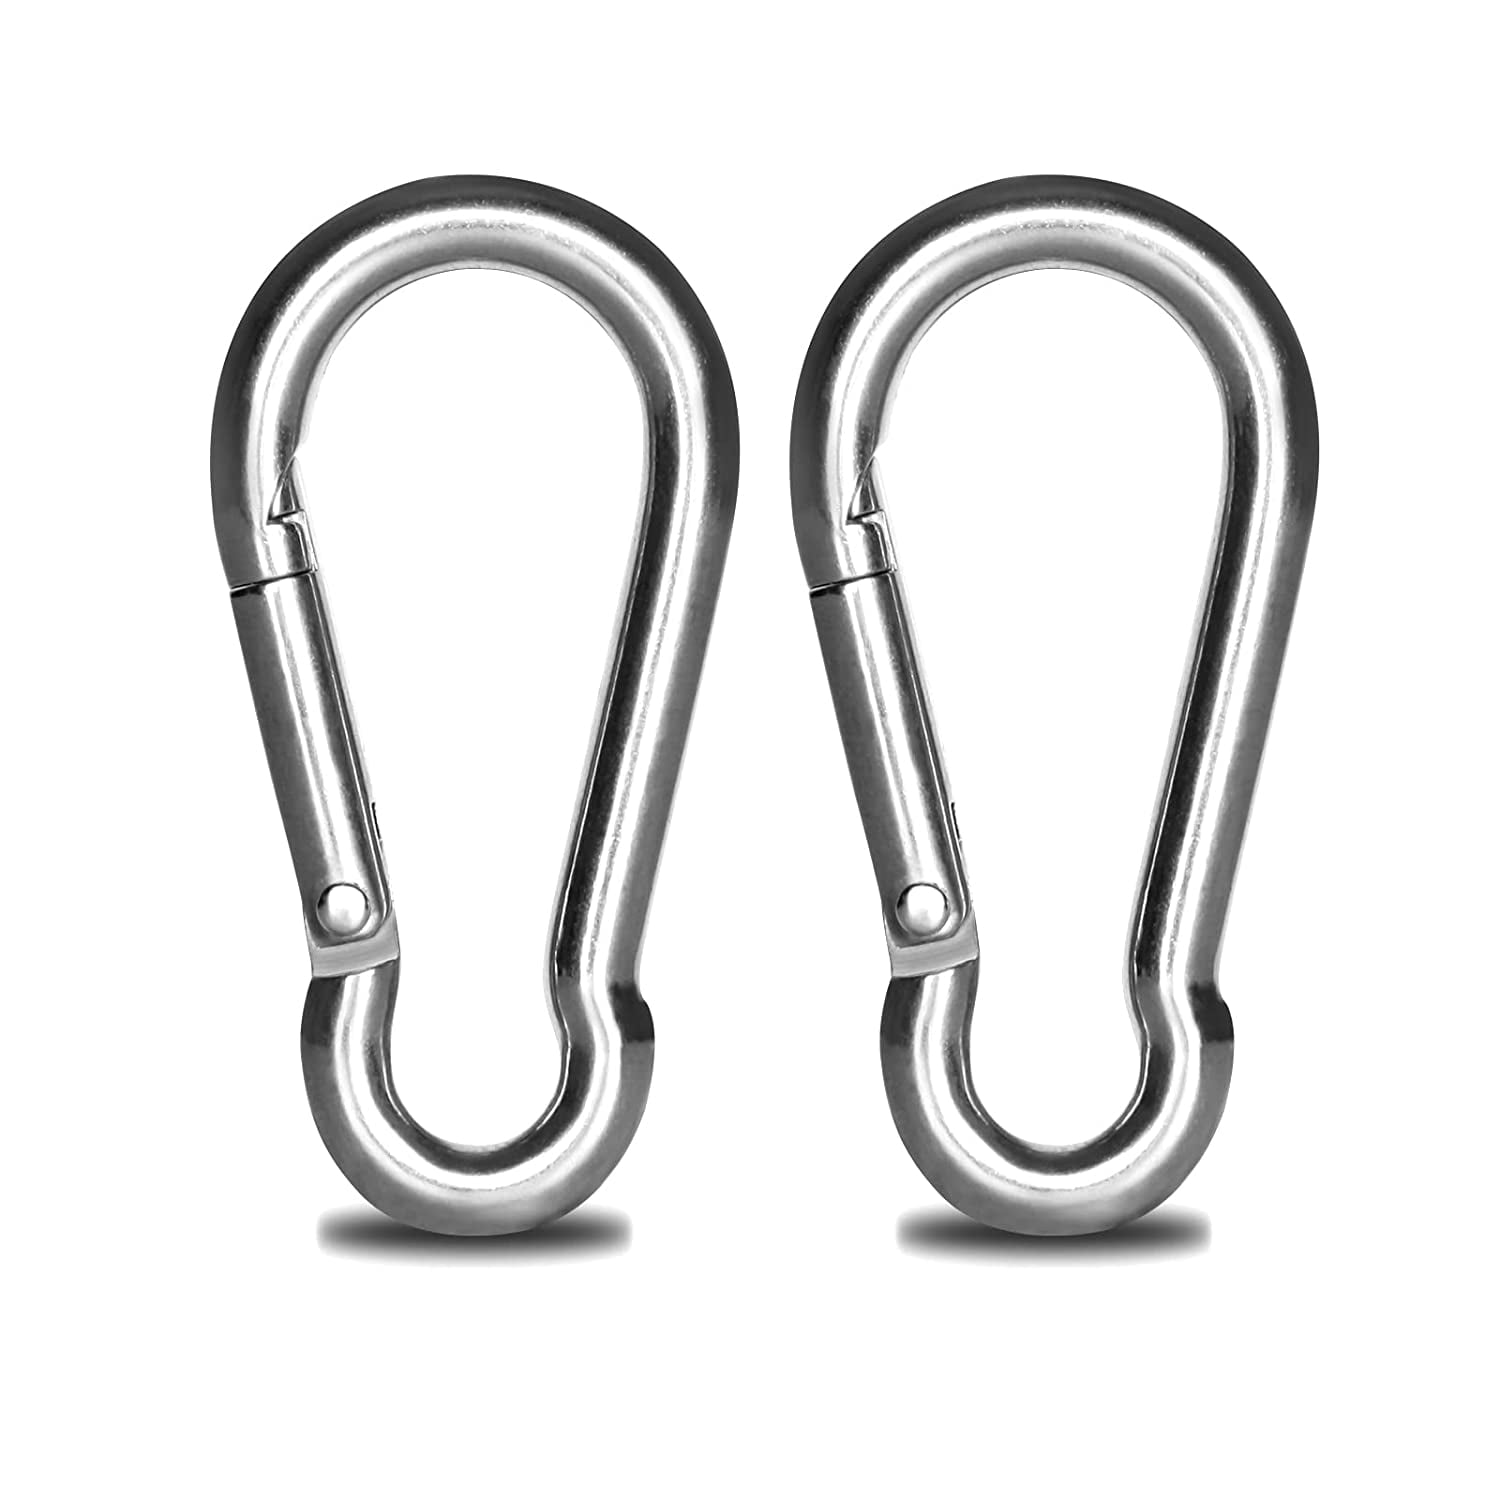 2 Pack 304 Stainless Steel Carabiner Clip, 5.5 inch Heavy Duty